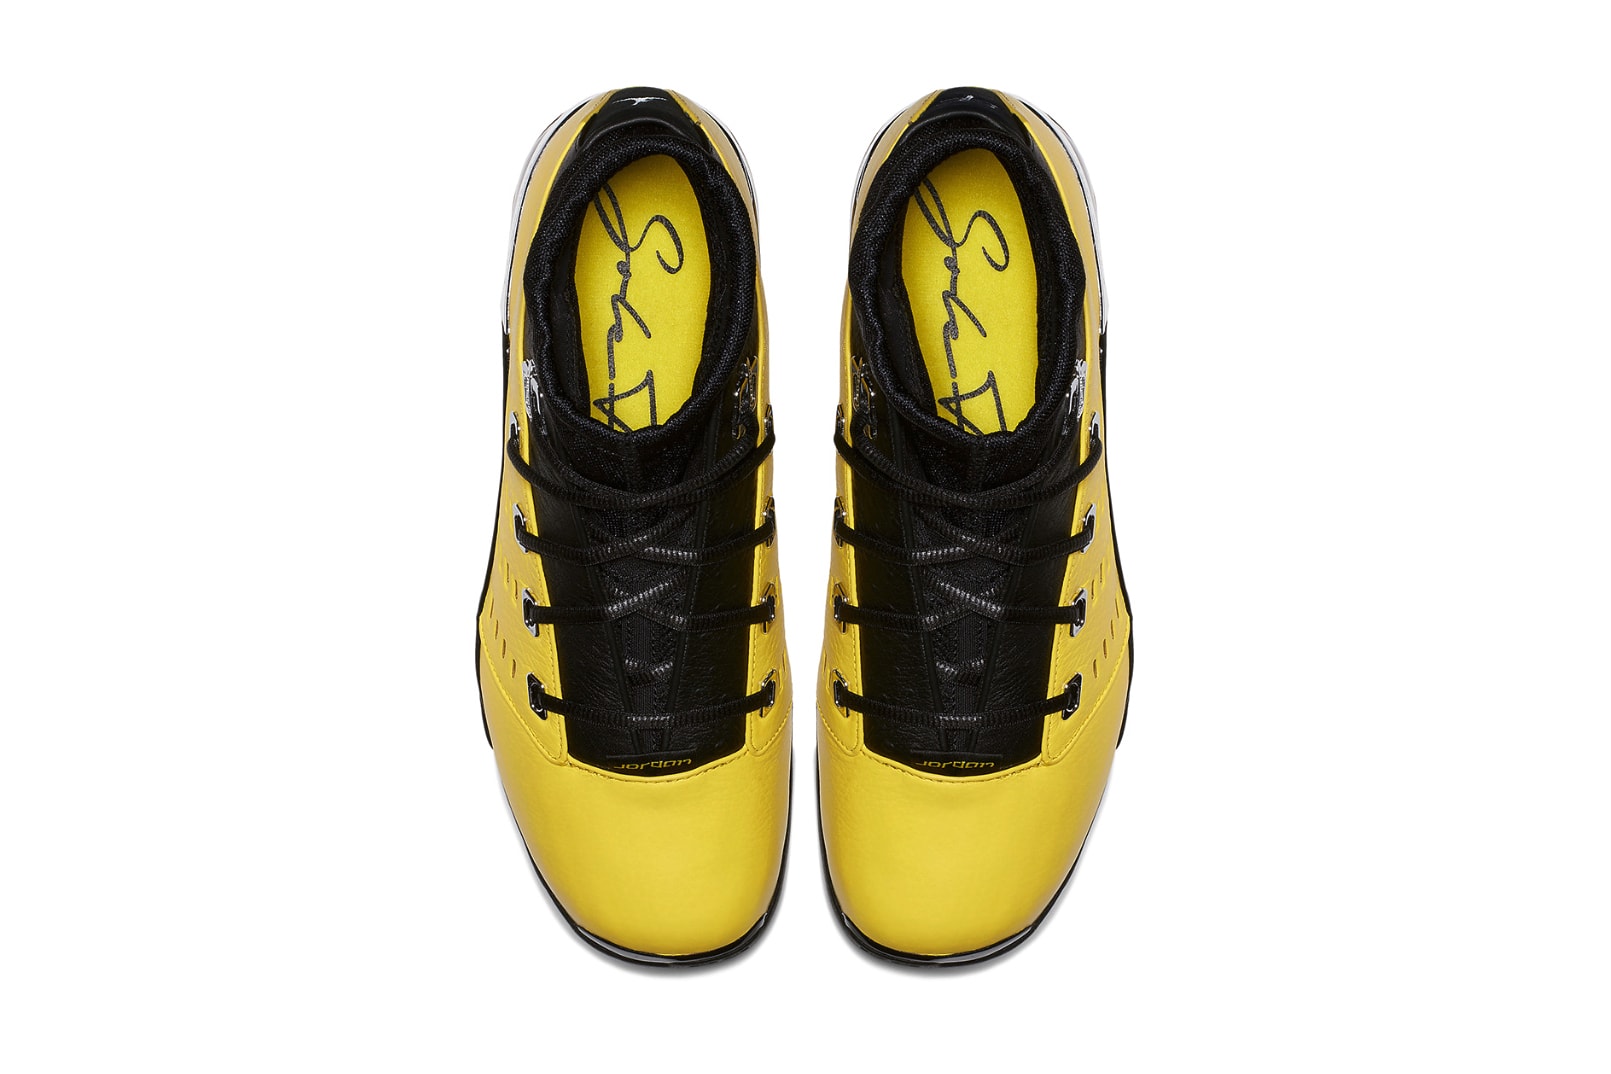 Solefly Air Jordan 17 Low collaboration yellow release date info 2018 february 17 sneakers shoes footwear lightning michael 2002 all star game washington wizards black